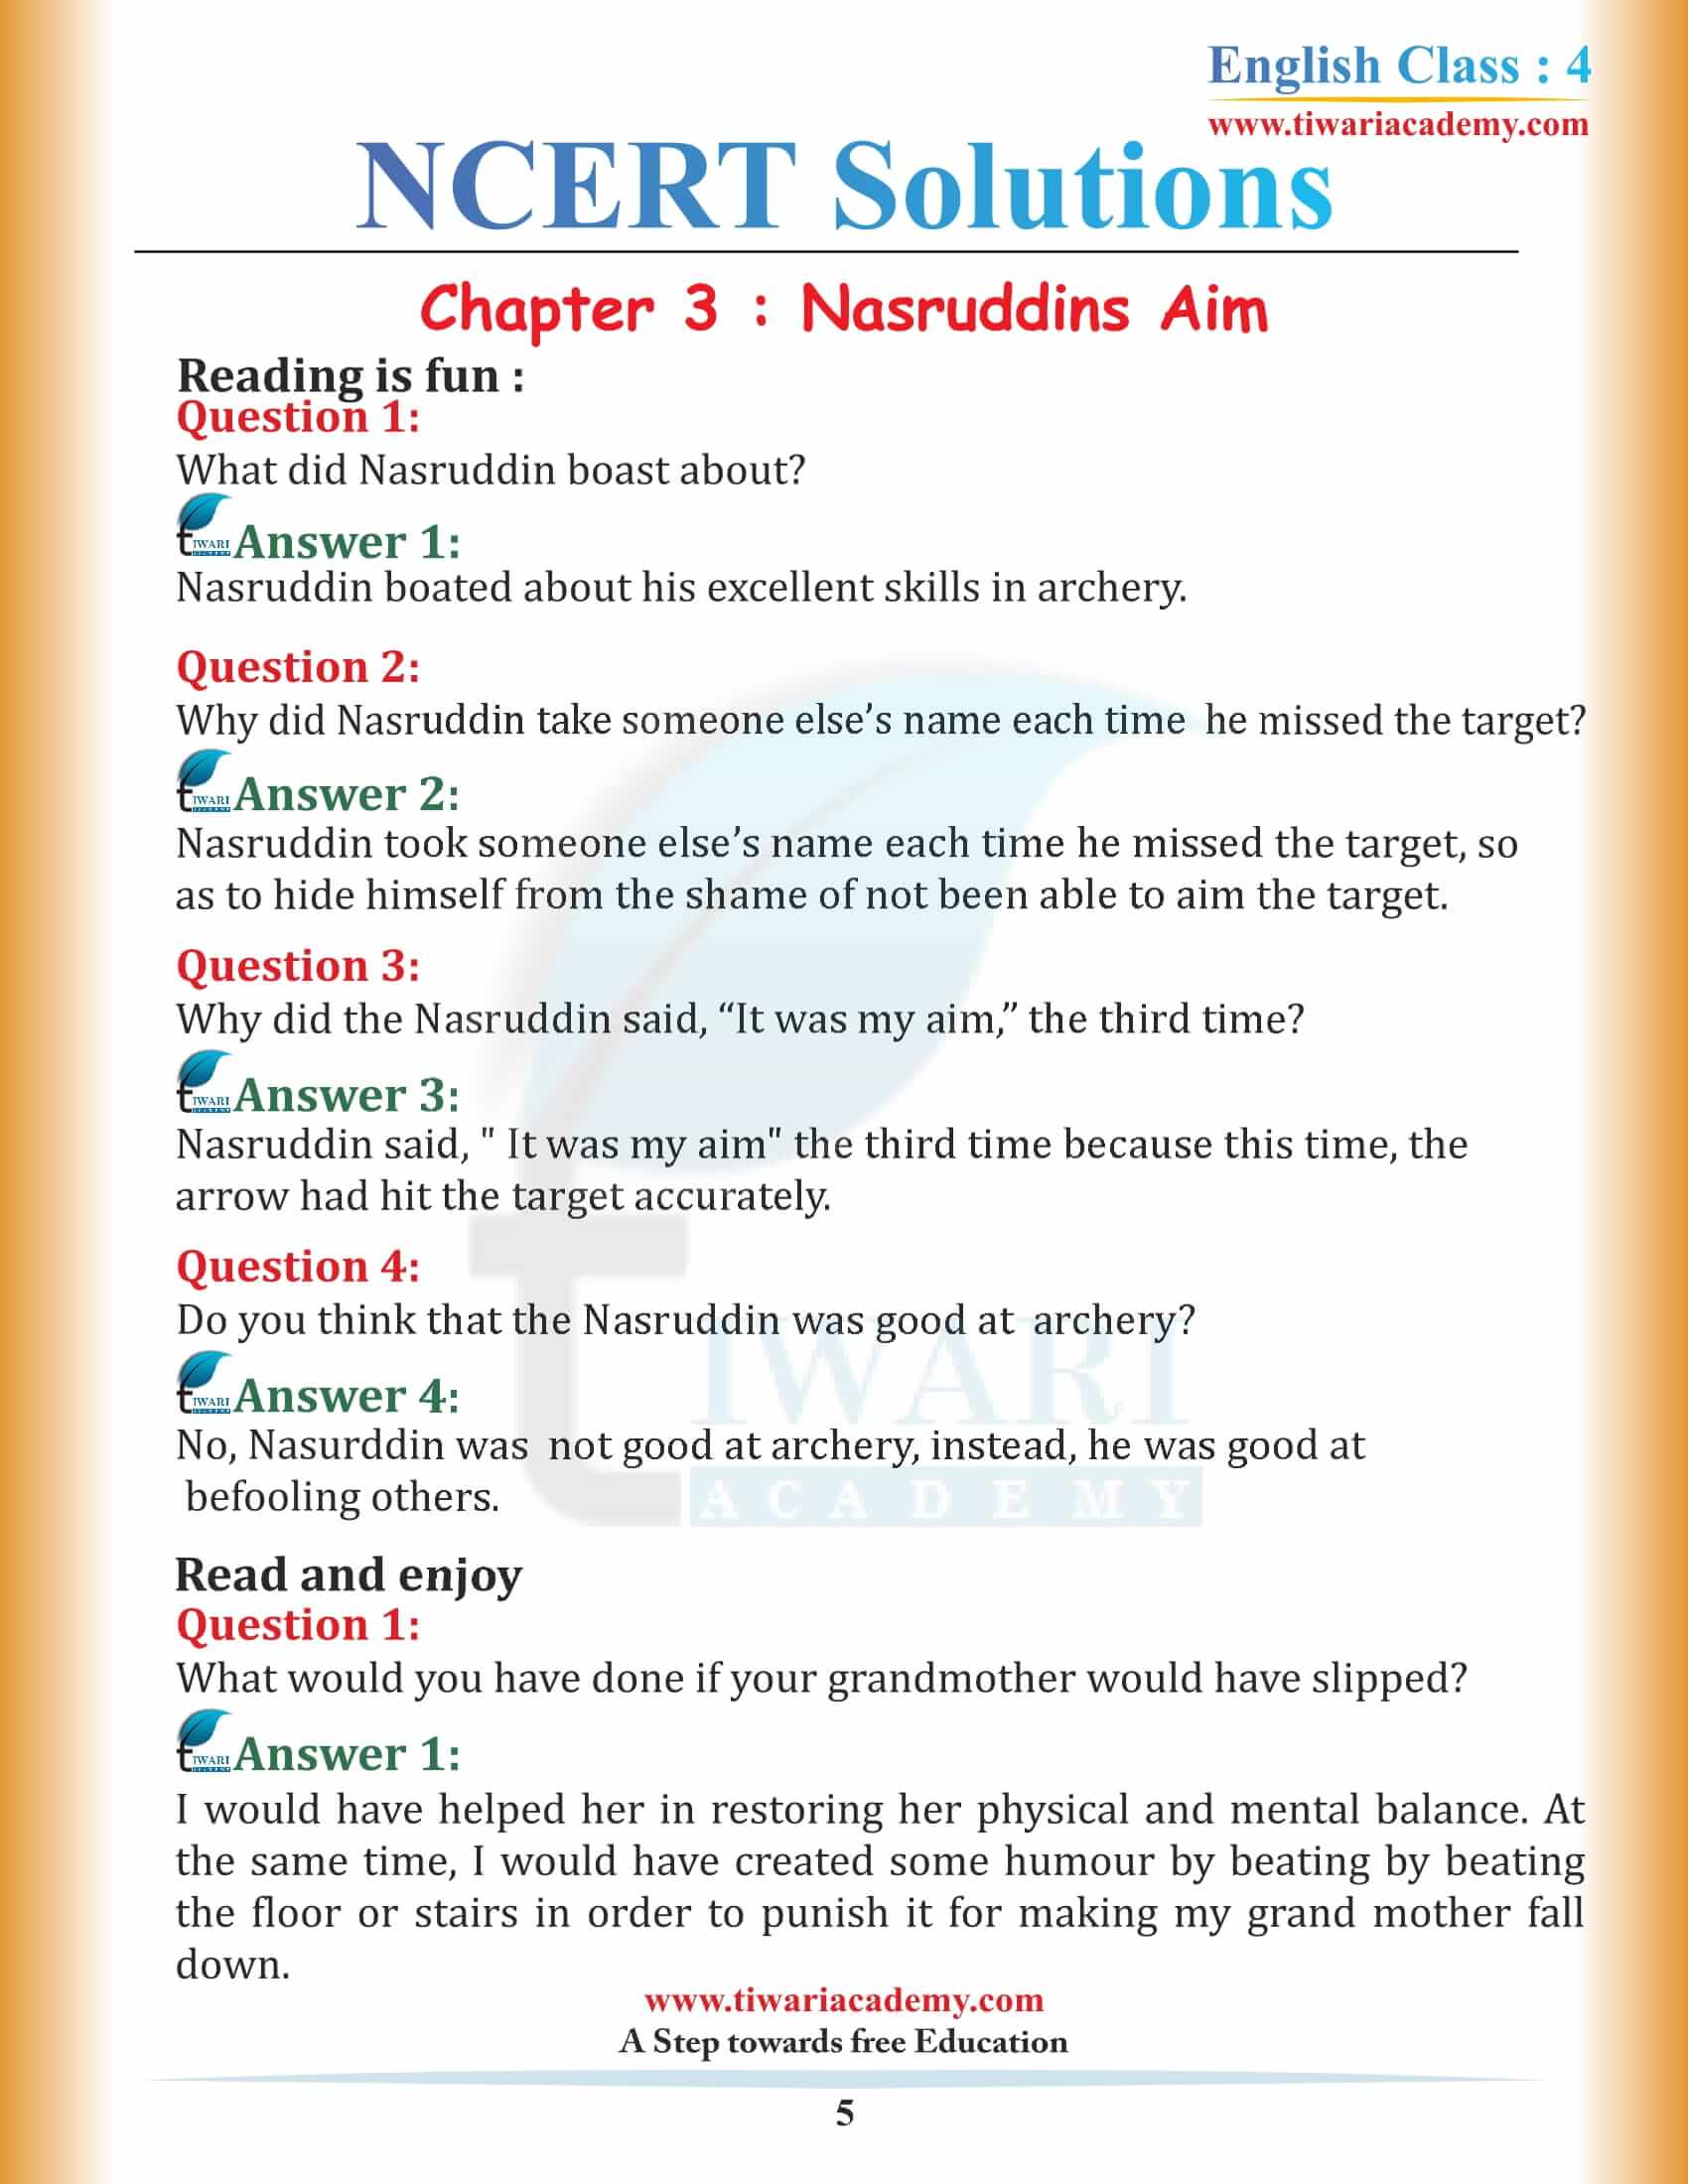 NCERT Solutions for Class 4 English Unit 3 Chapter 2